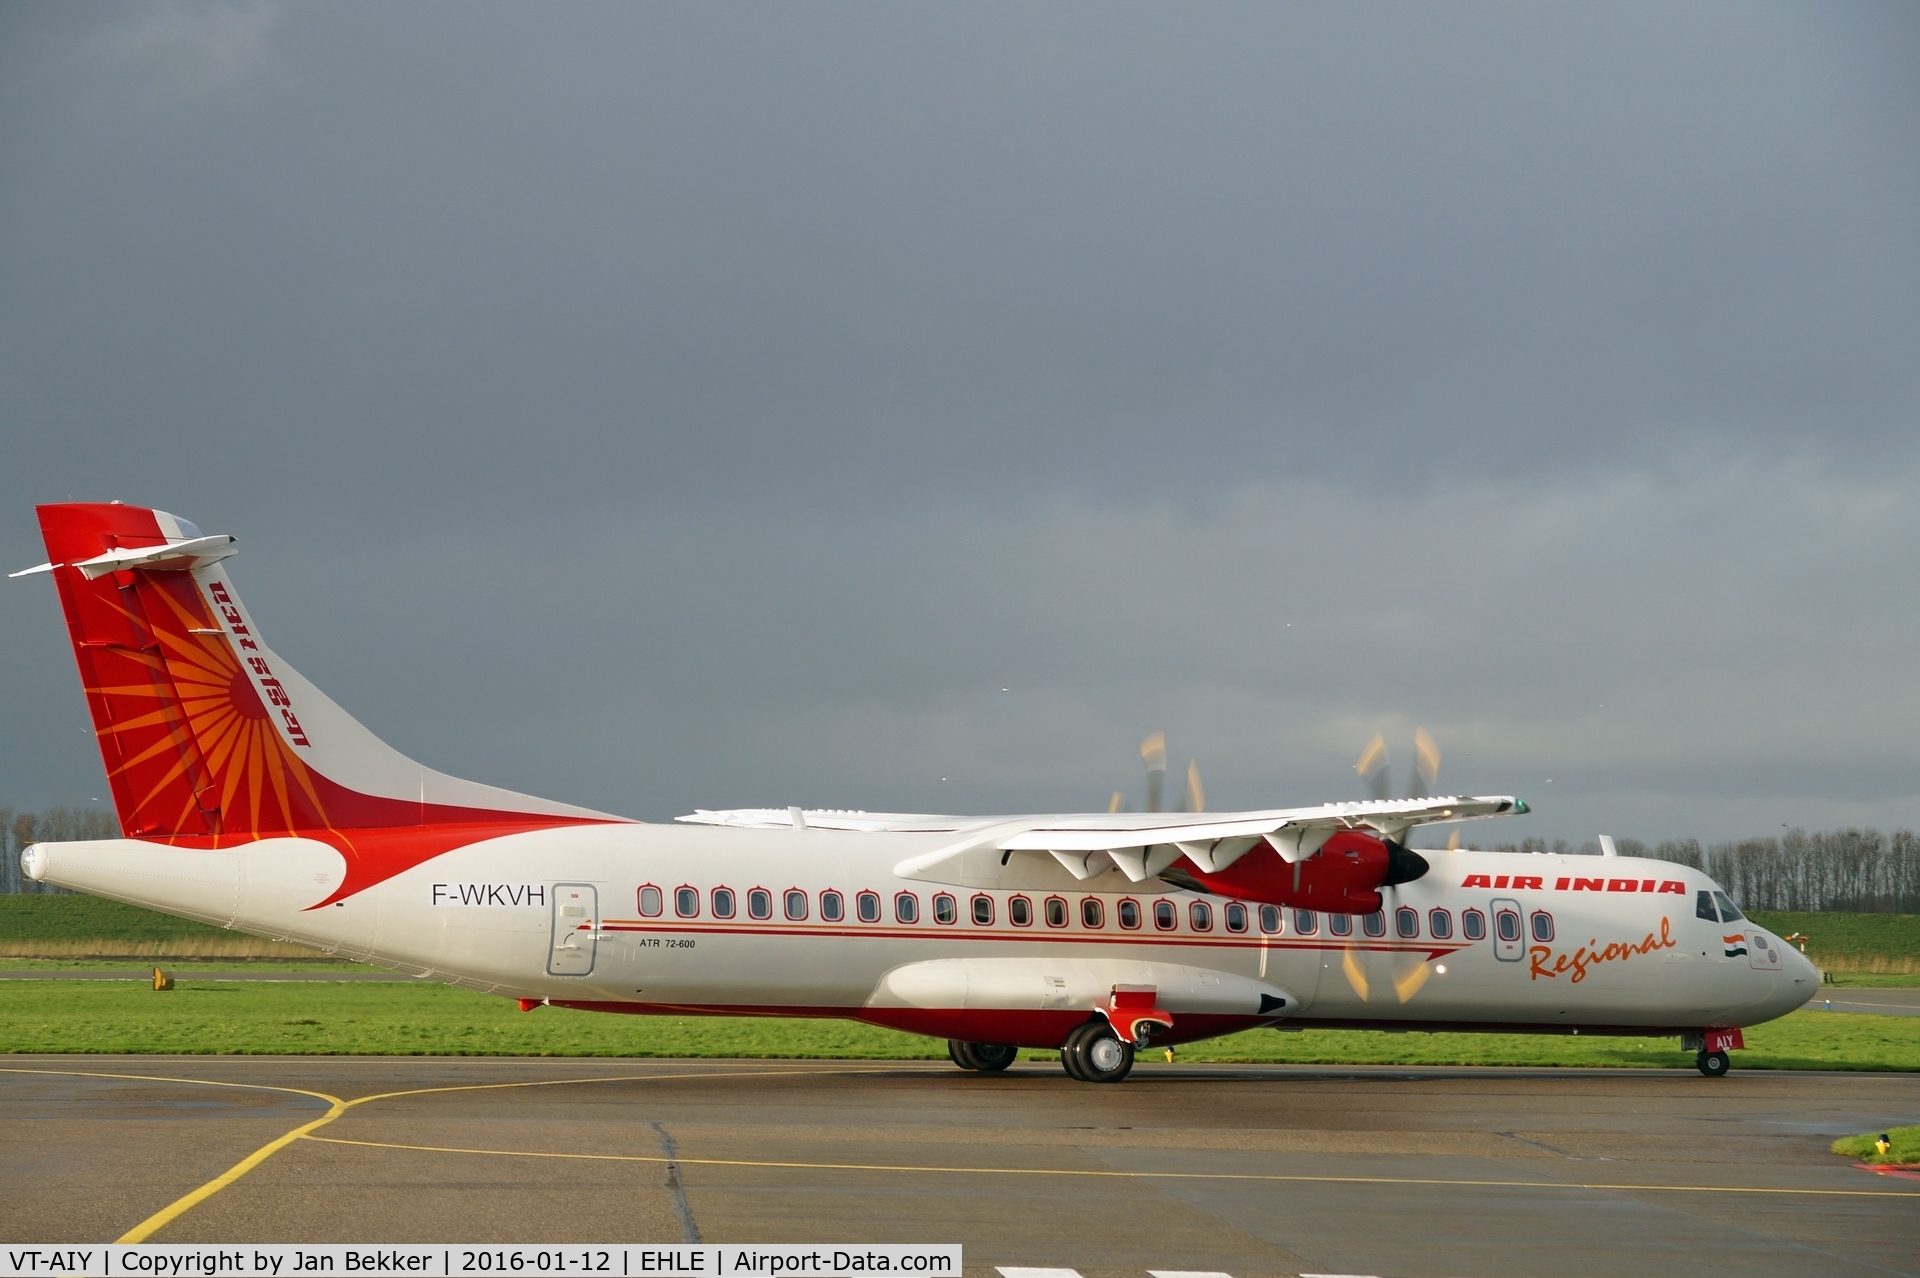 VT-AIY, 2015 ATR 72-600 (72-212A) C/N 1273, Just departing for its destination India. On the nose gear doors already the new registration